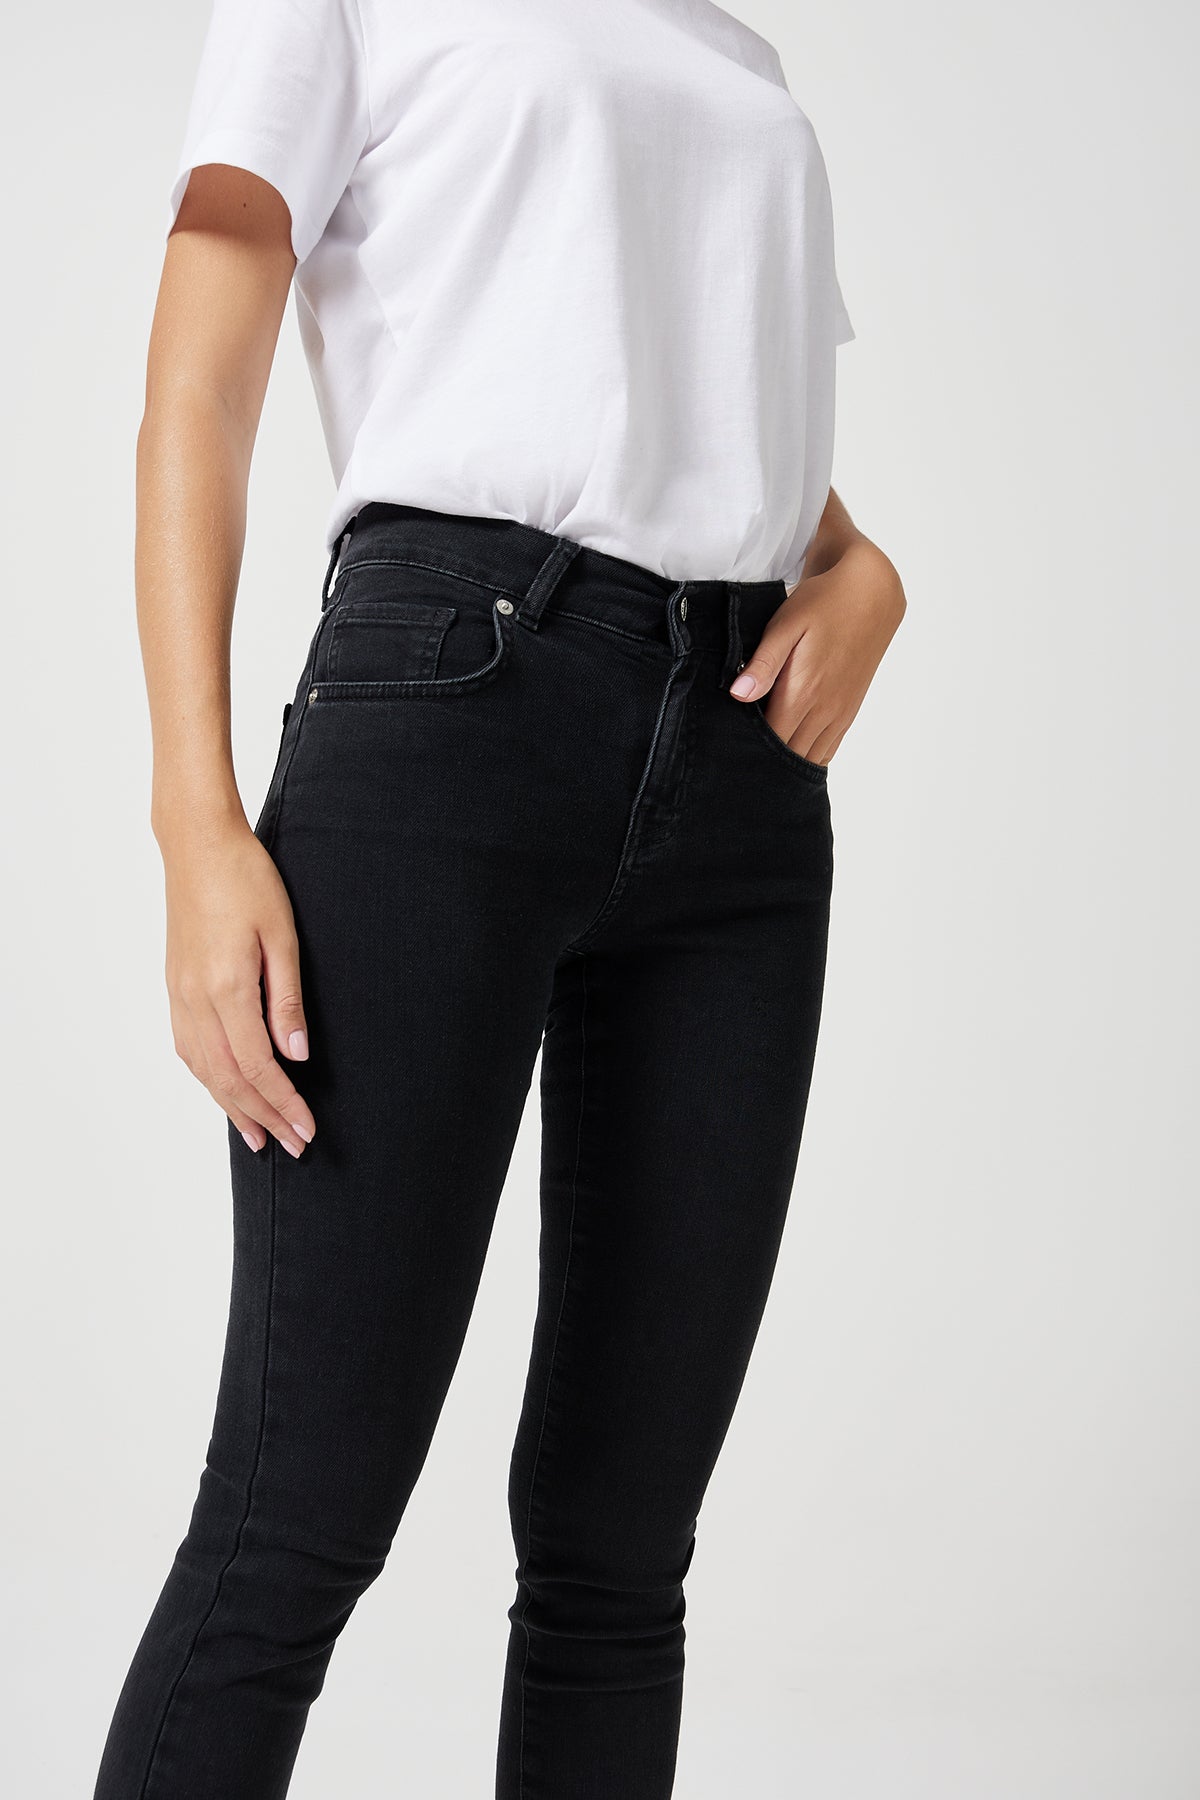 The Mid Rise Skinny Clean Black